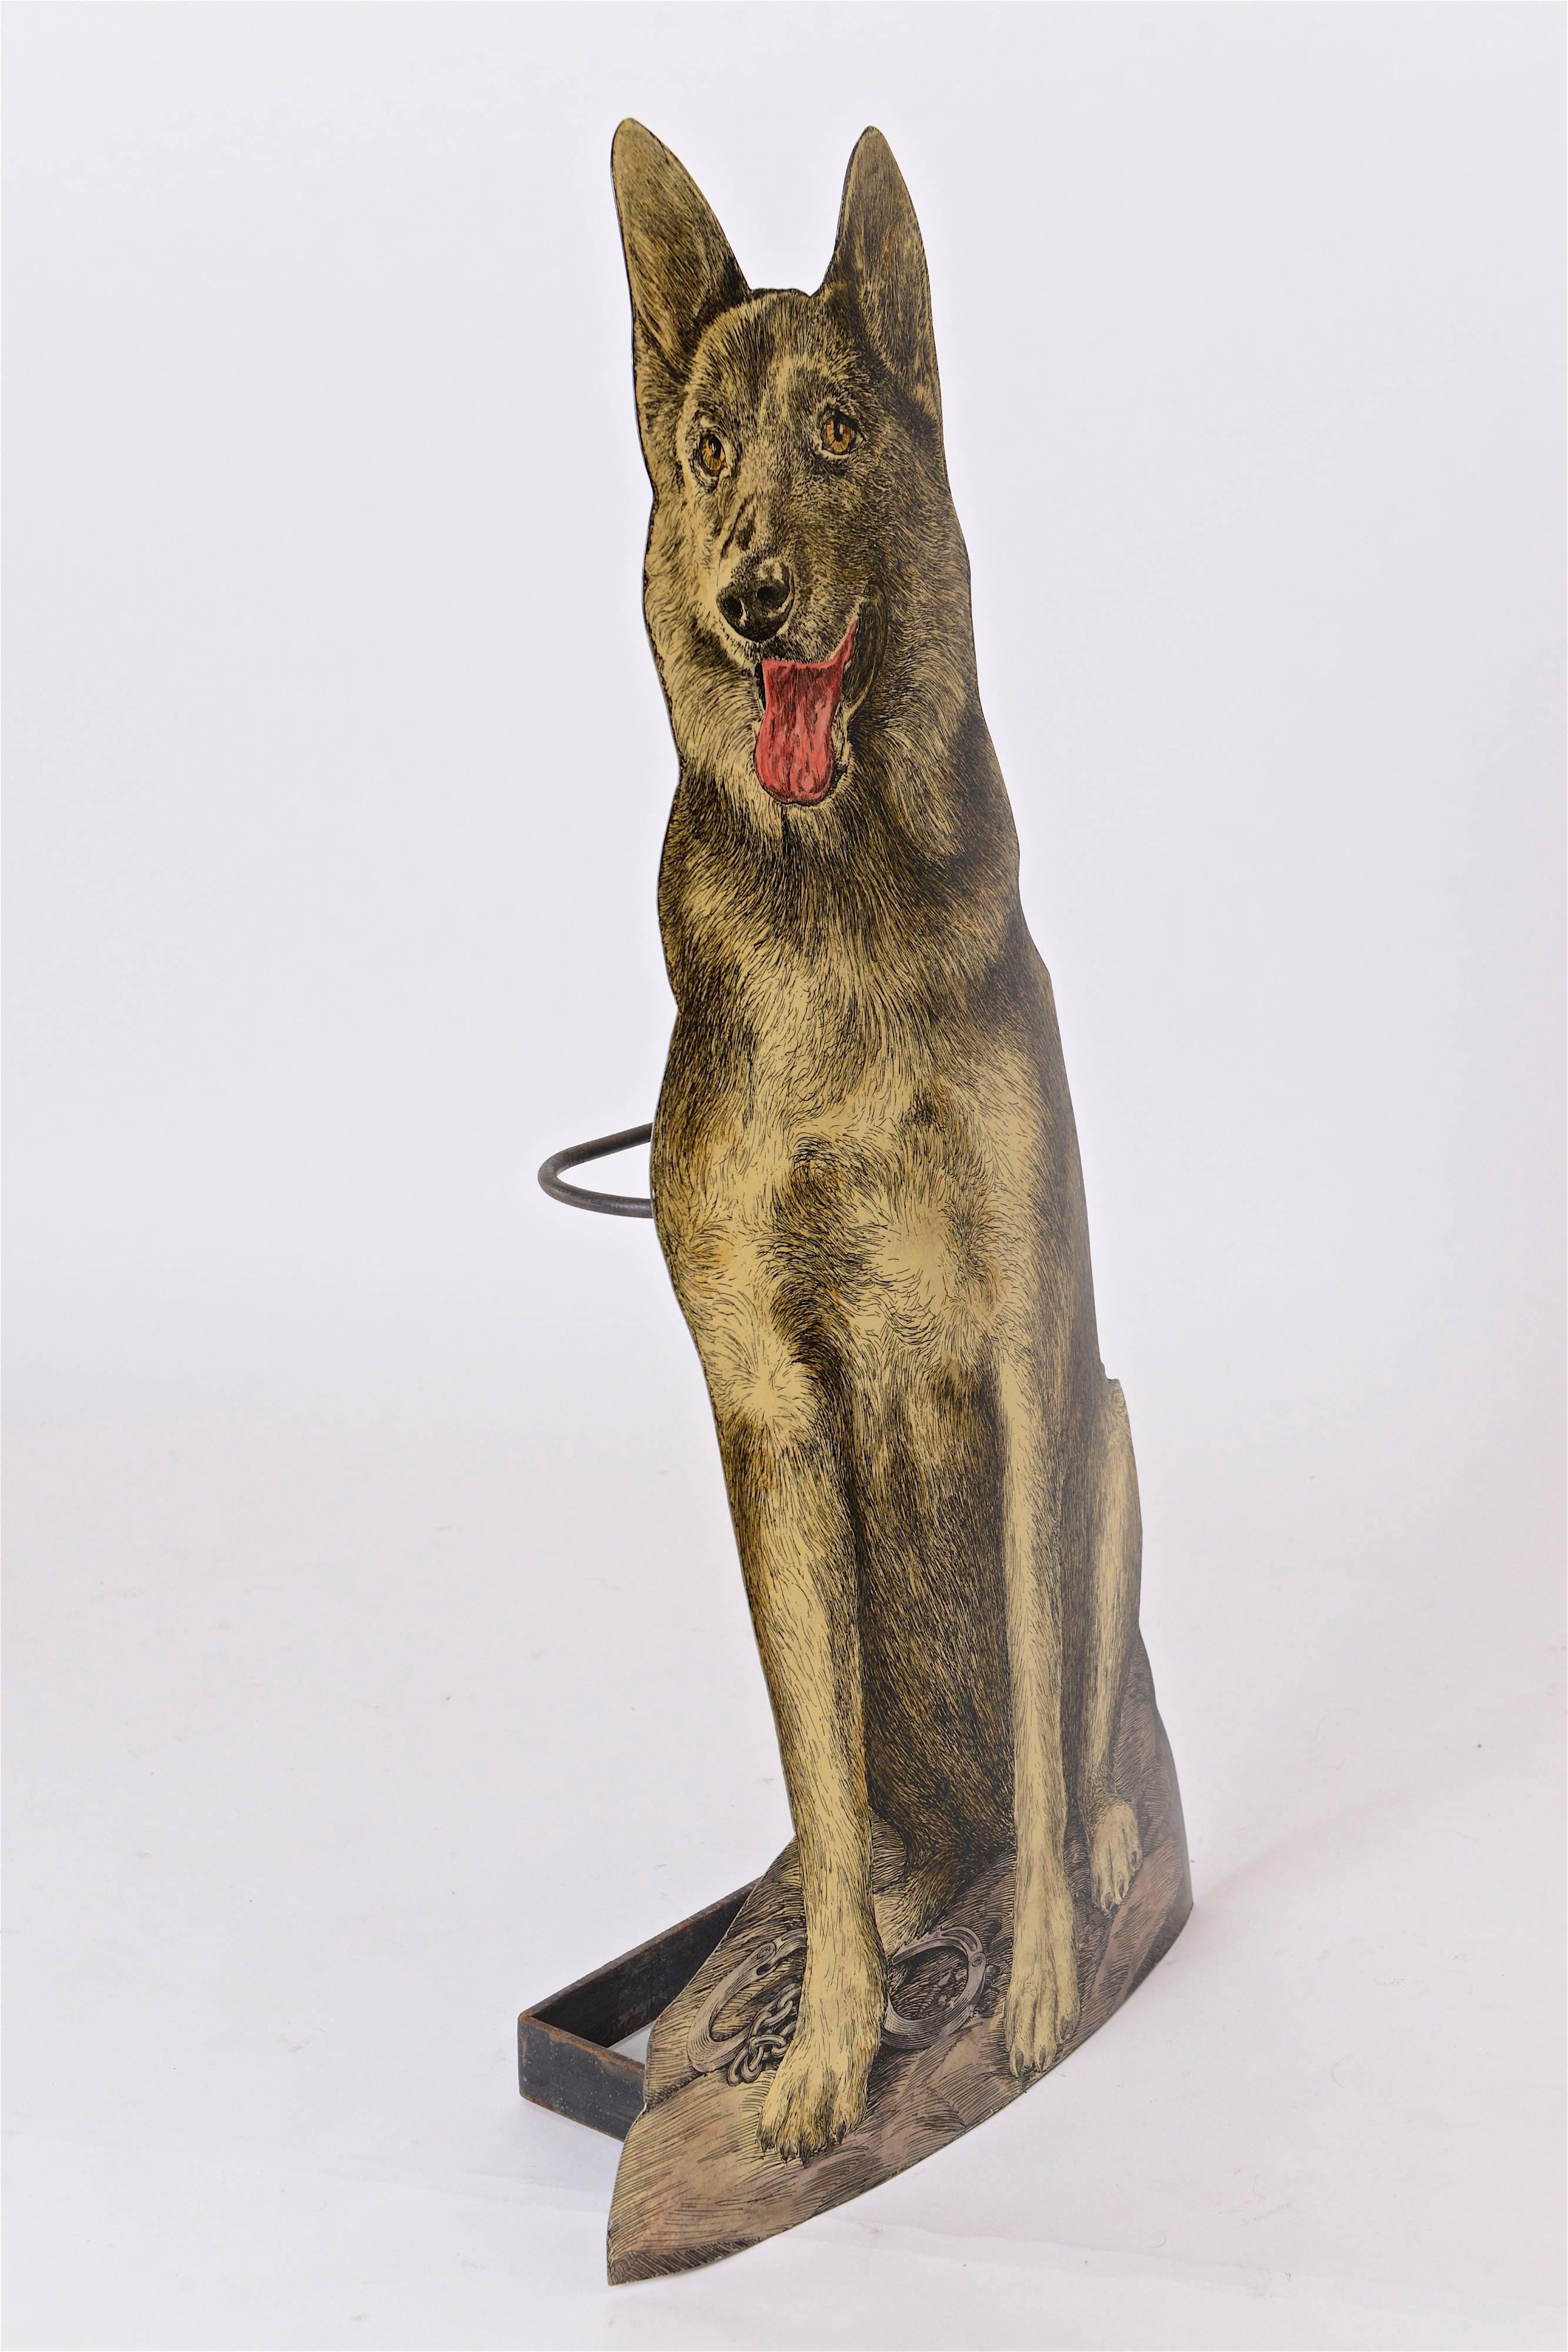 A wonderfully fun umbrella stand by the creative designer, Piero Fornasetti. One of many dogs that Piero featured on his umbrella stands, this example portrays an Alsatian dog, most probably a police dog, due to the pair of handcuffs that feature in